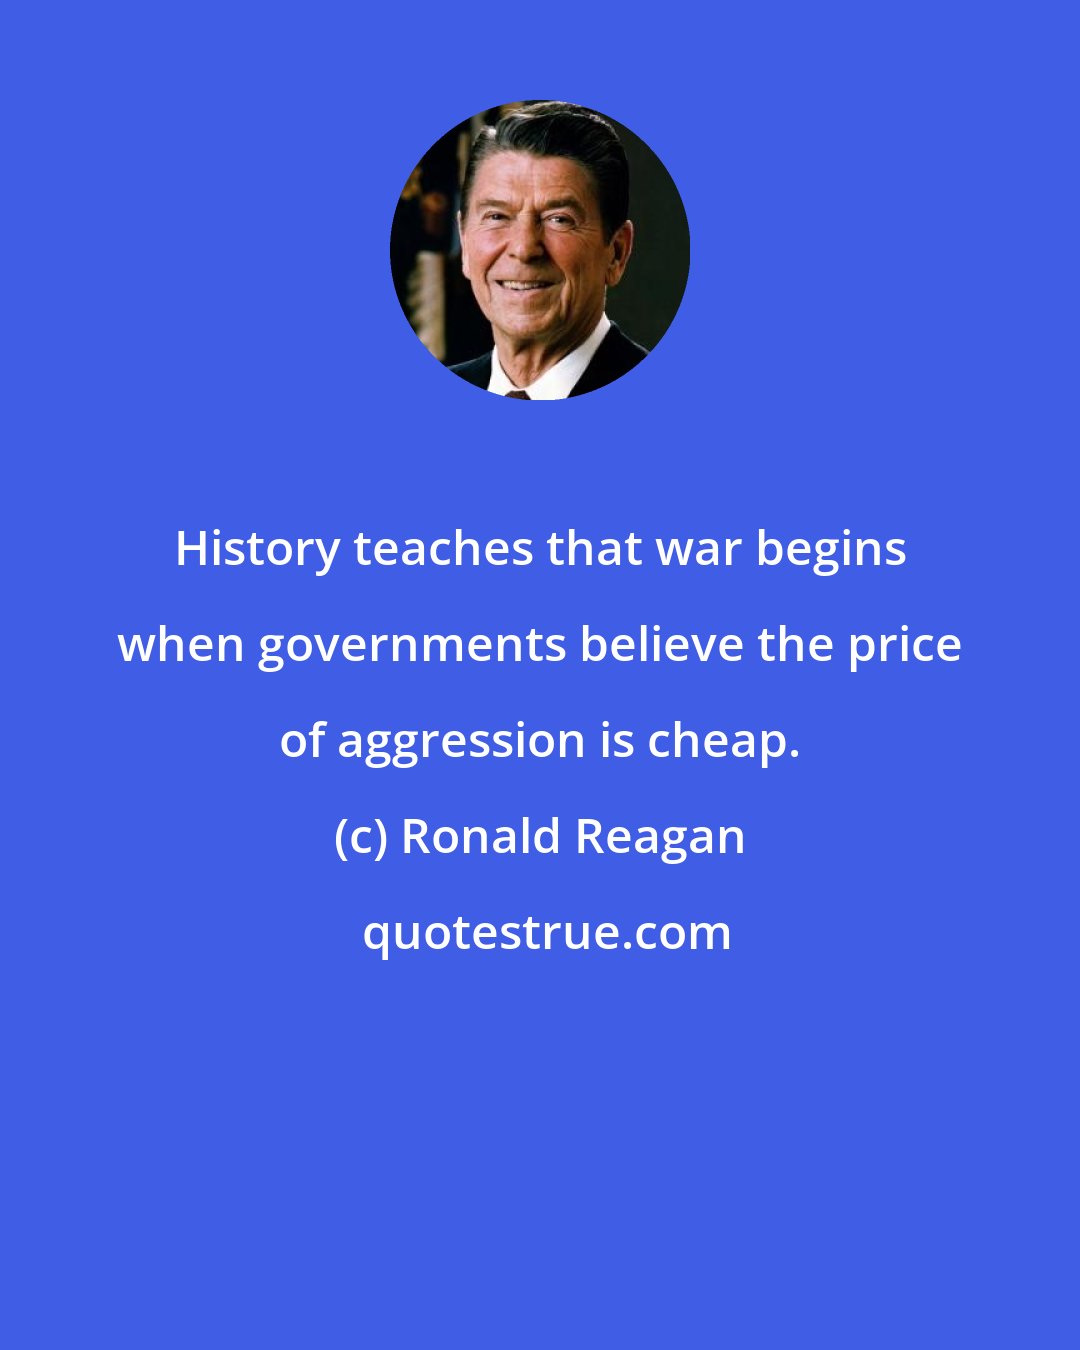 Ronald Reagan: History teaches that war begins when governments believe the price of aggression is cheap.